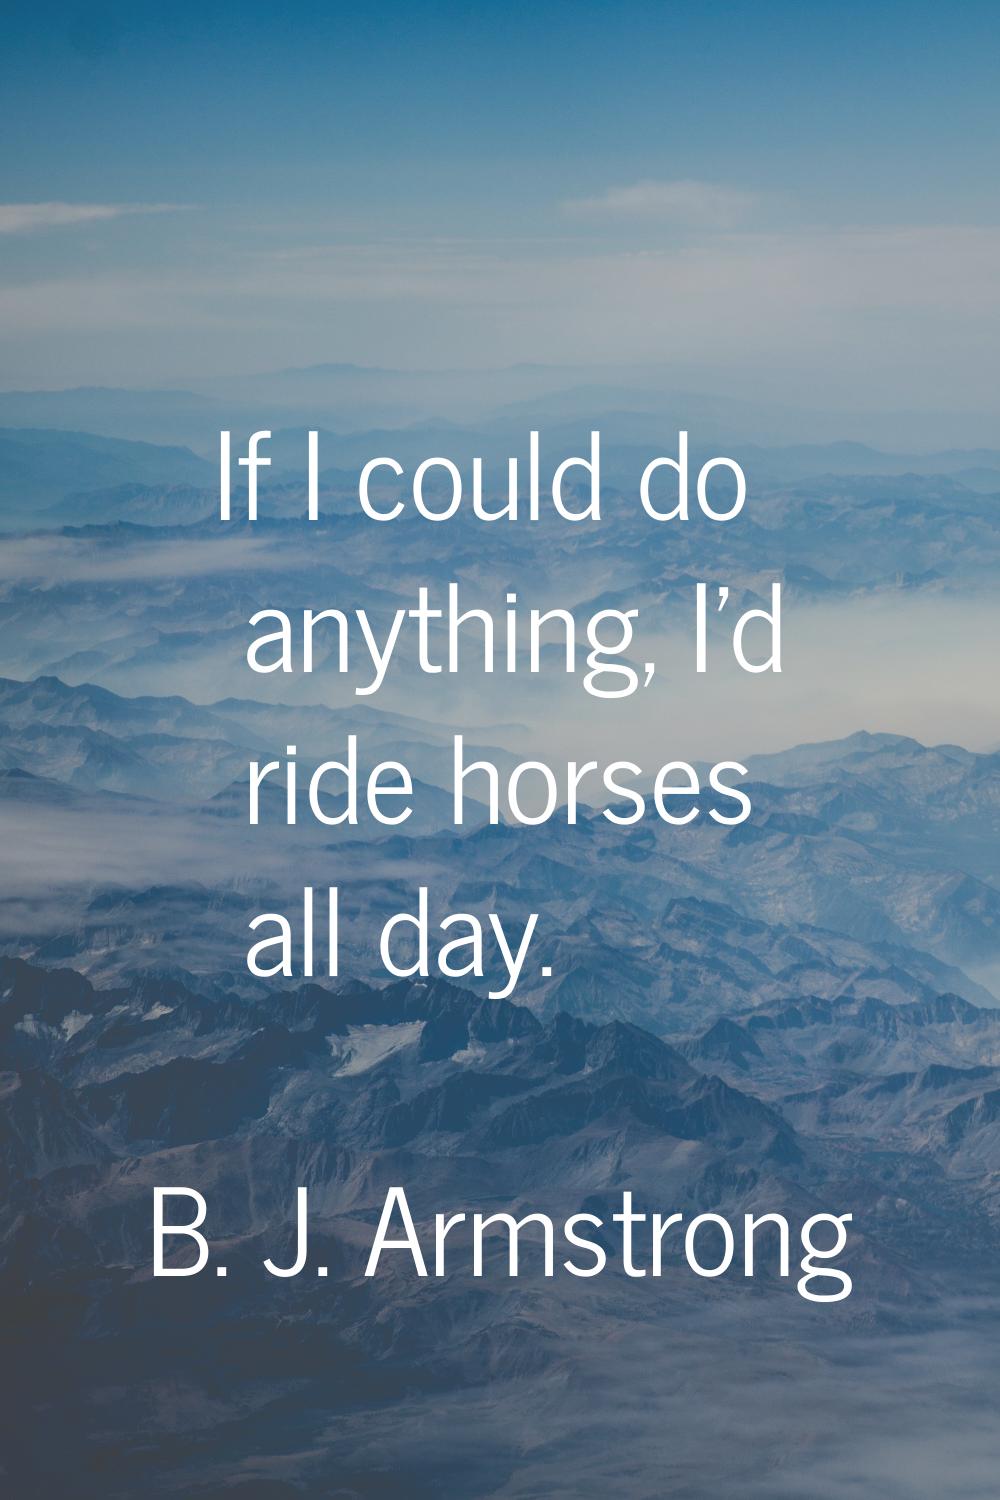 If I could do anything, I'd ride horses all day.